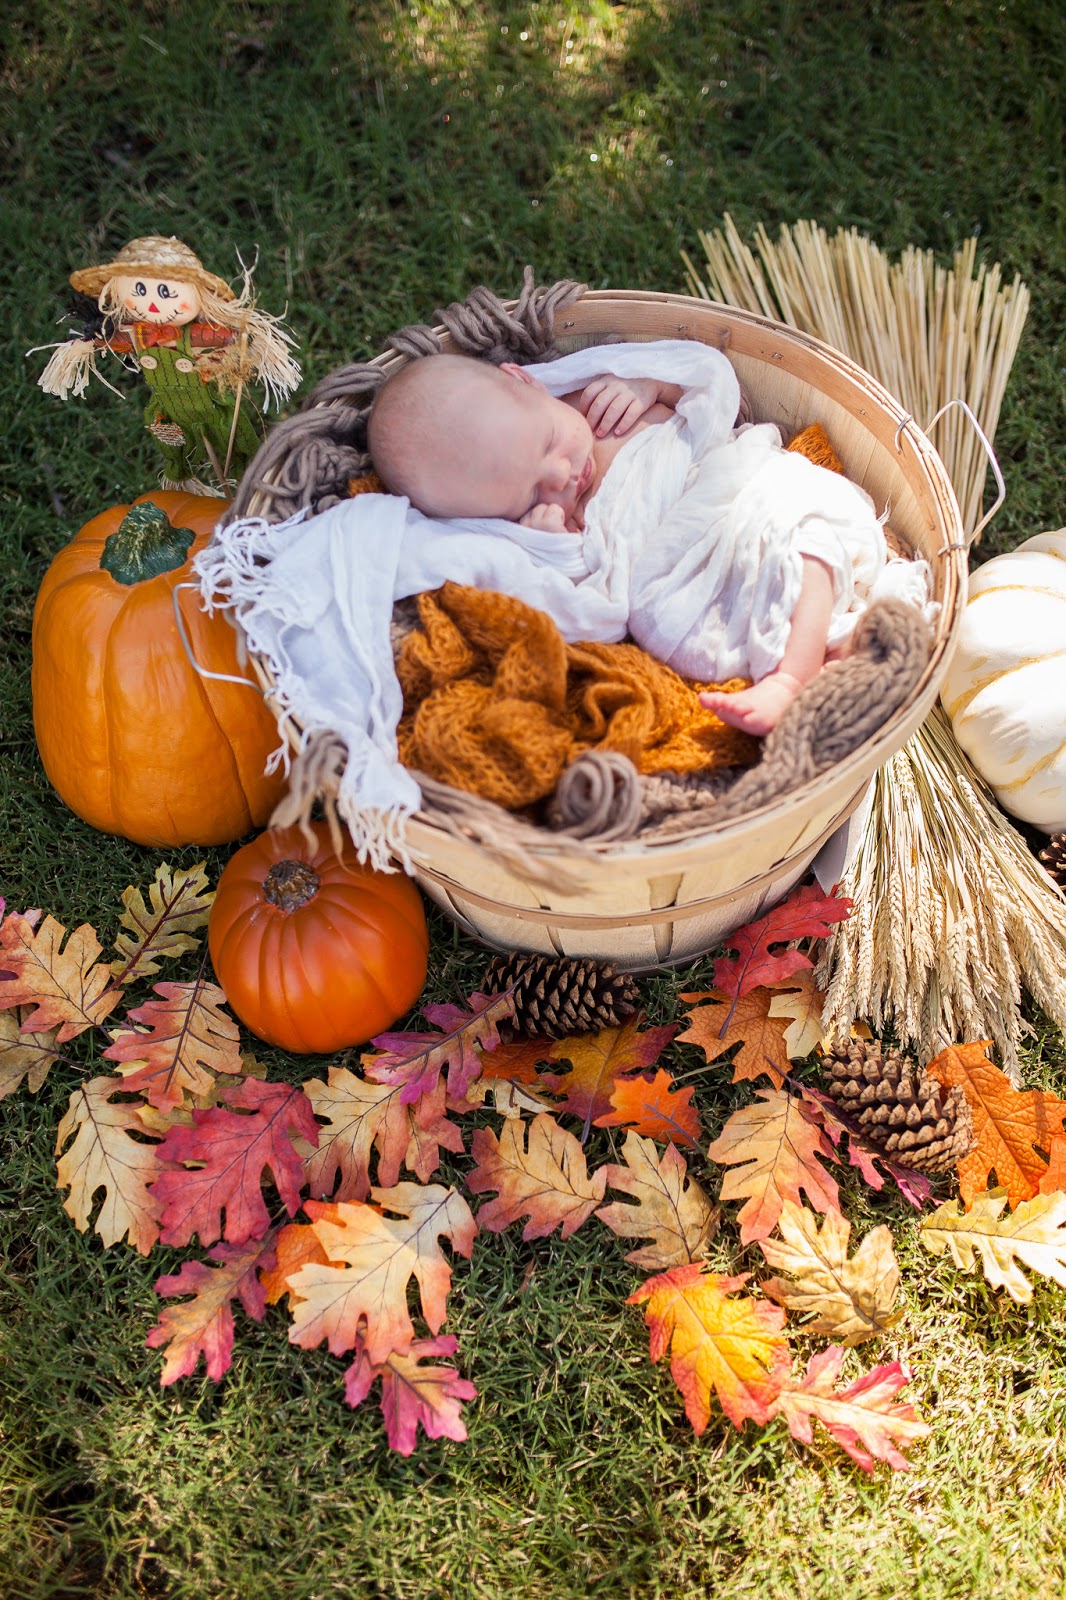 Newborn baby photo shoot: baby swaddled in a basket with fall leaves and pumpkins in the foreground. 